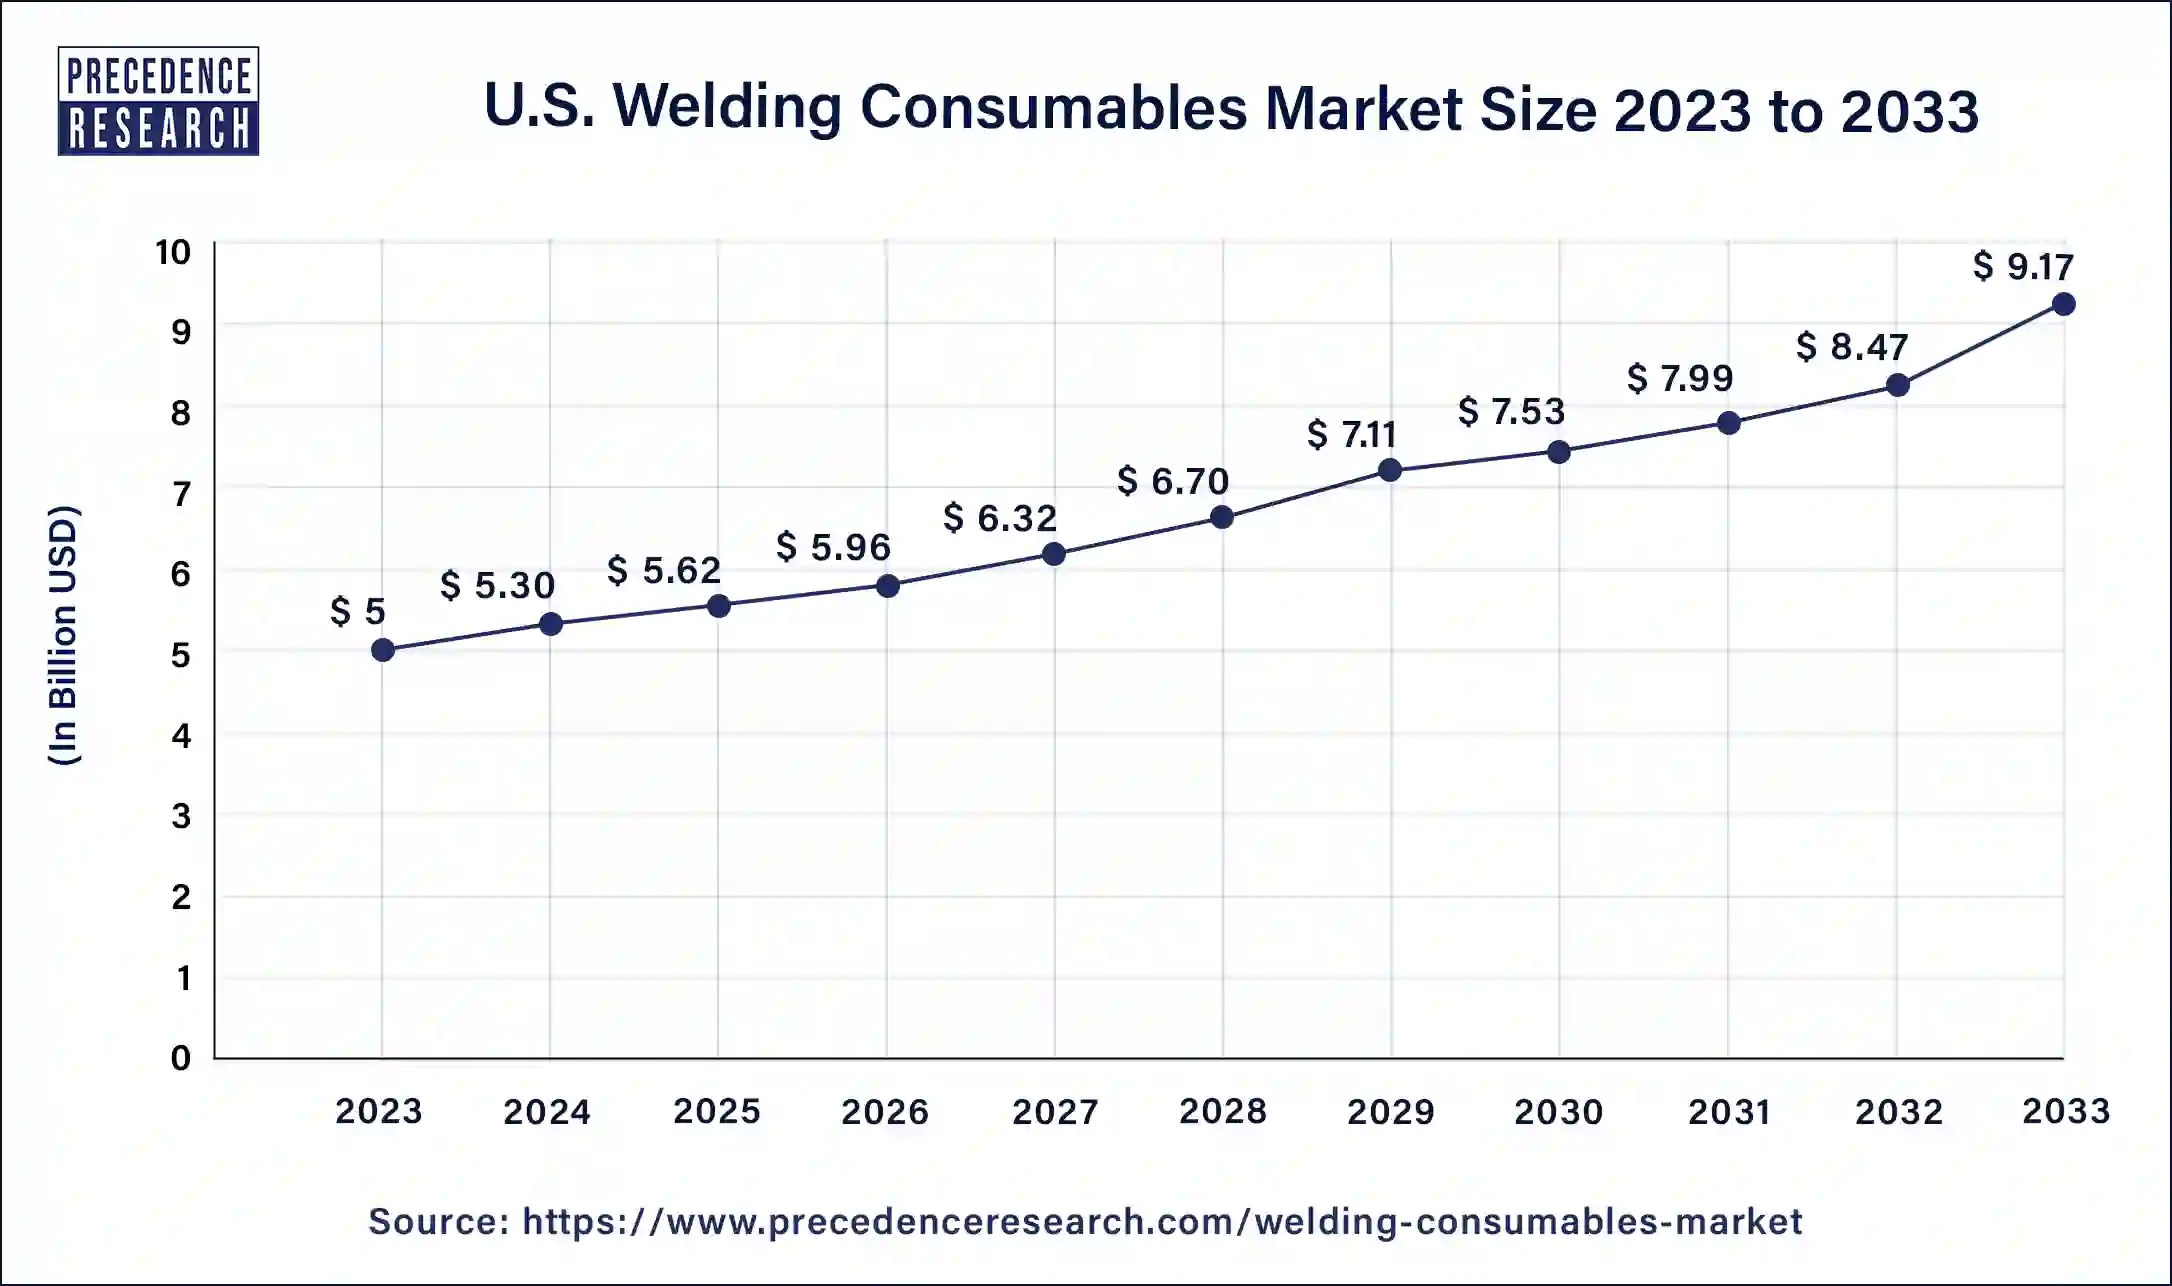 U.S. Welding Consumables Market Size 2024 to 2033